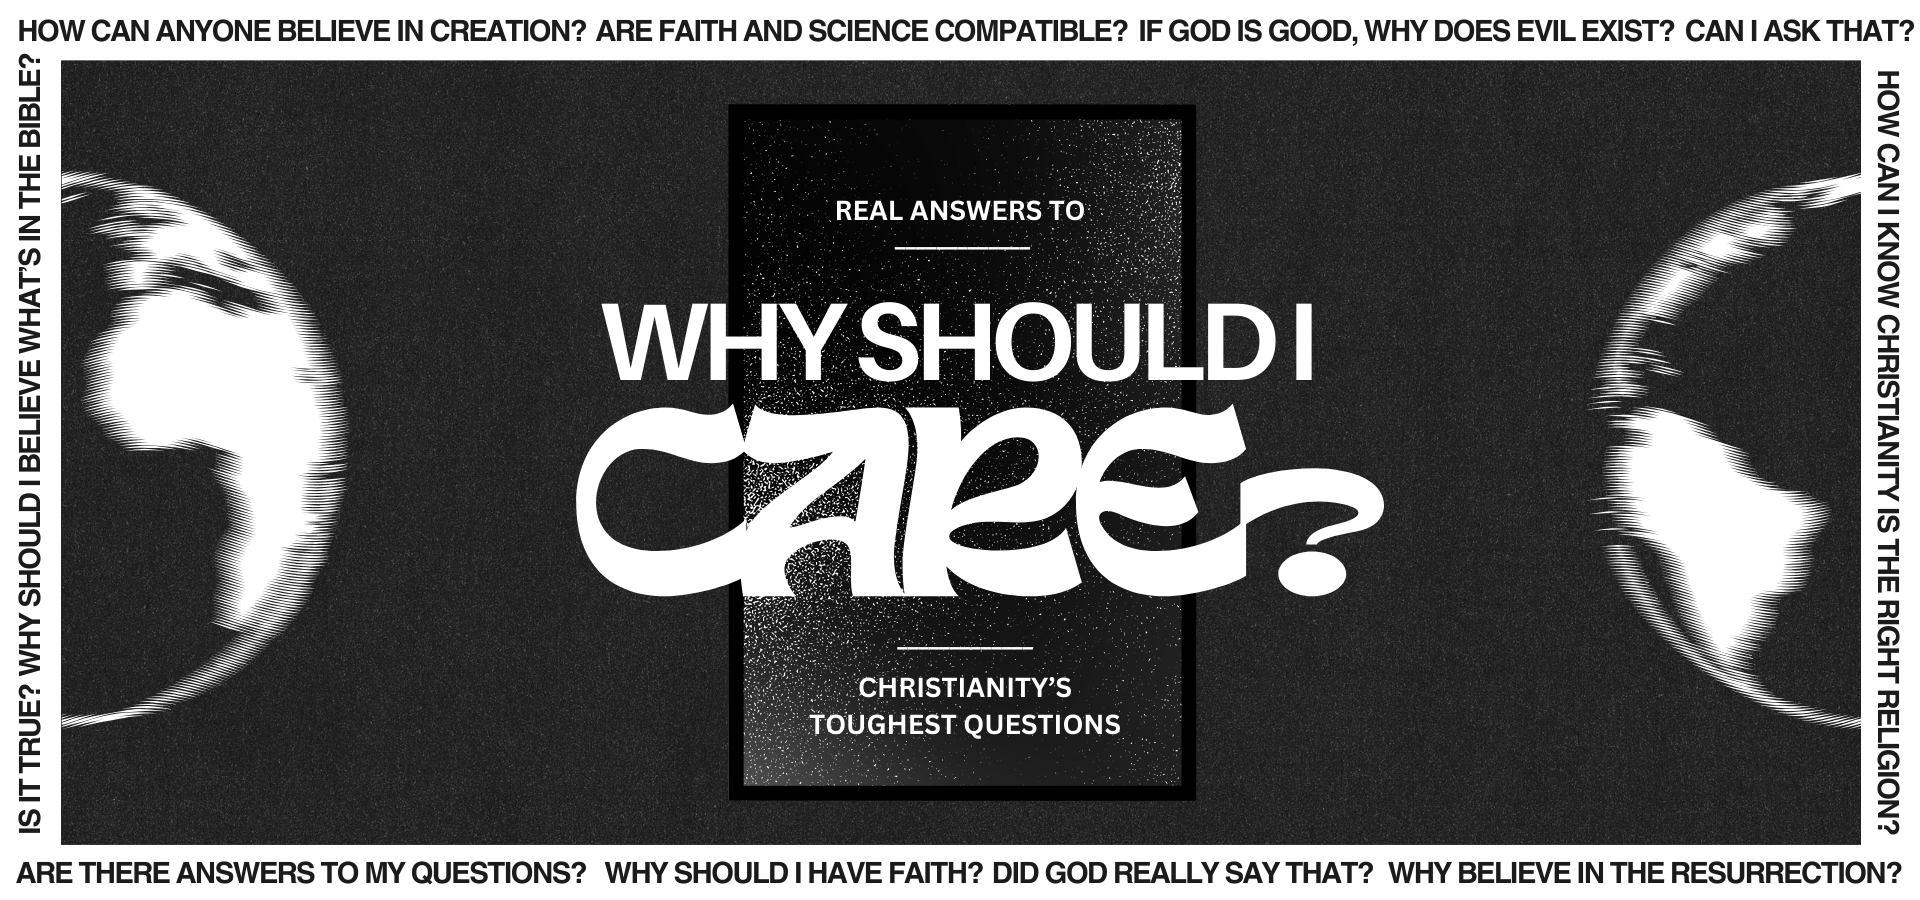 Are Faith and Science Compatible?